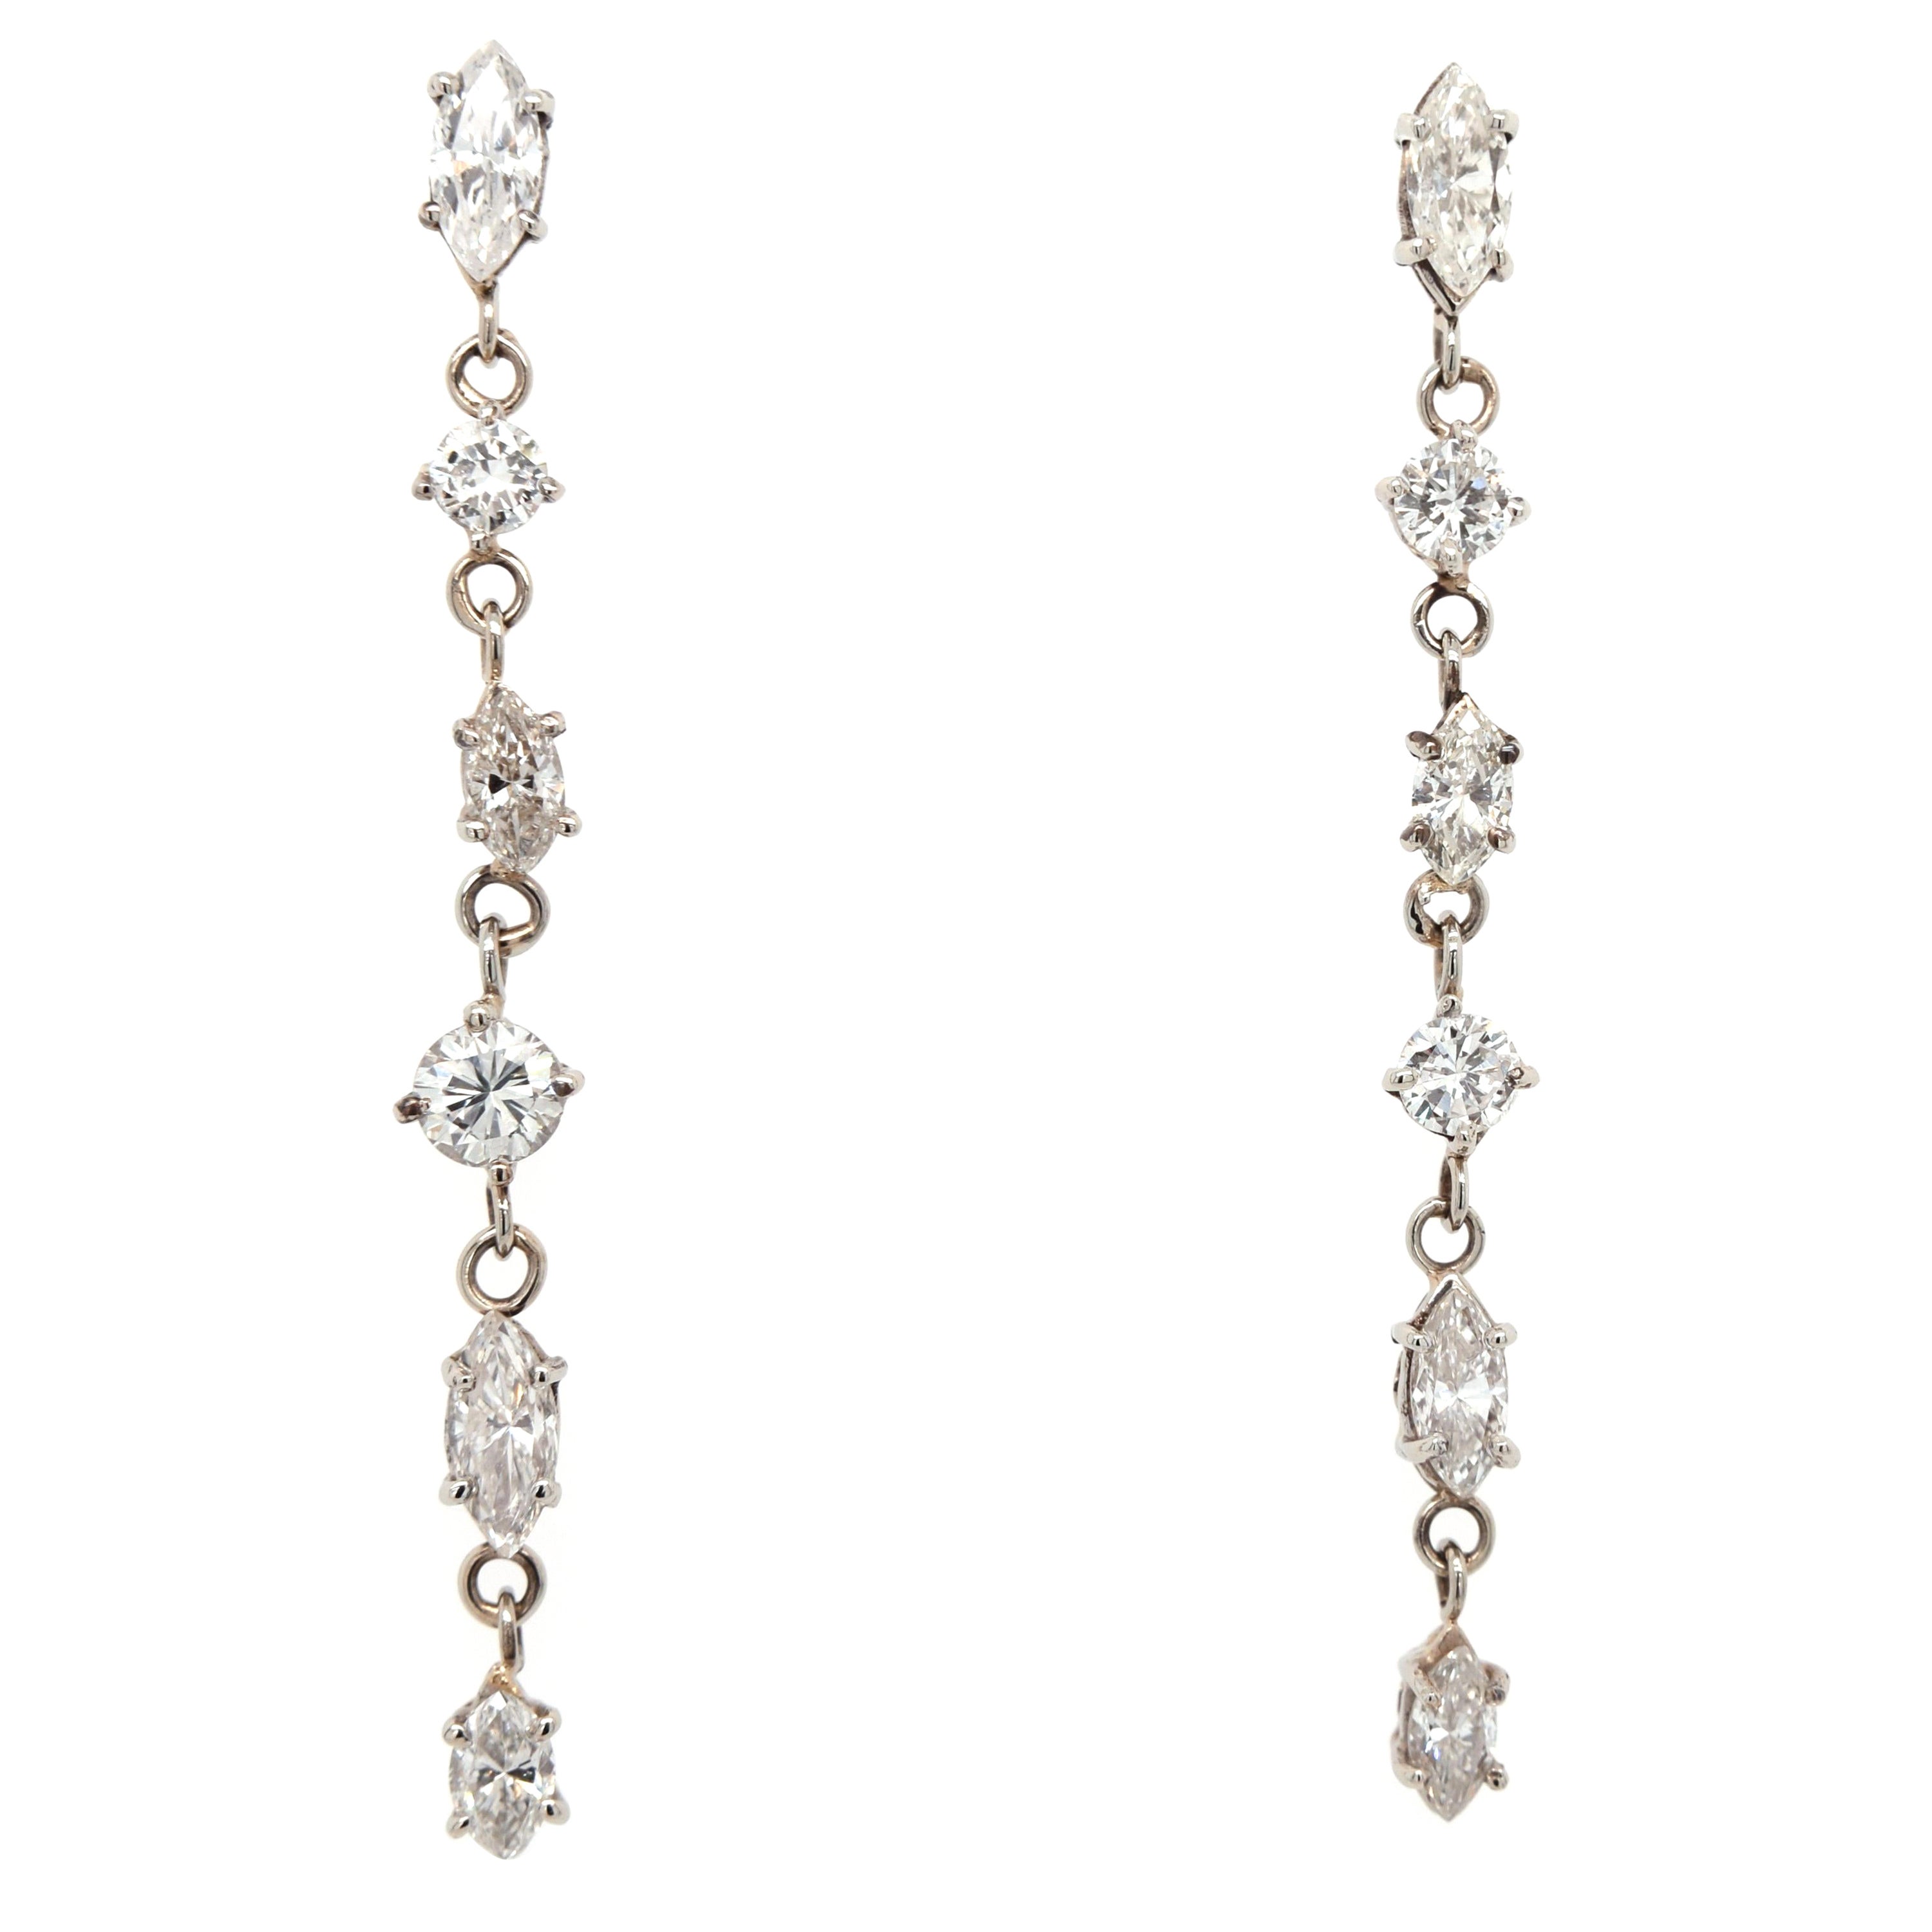 1.56ct mismatched drop diamond earrings, round and marquise brilliant cuts 